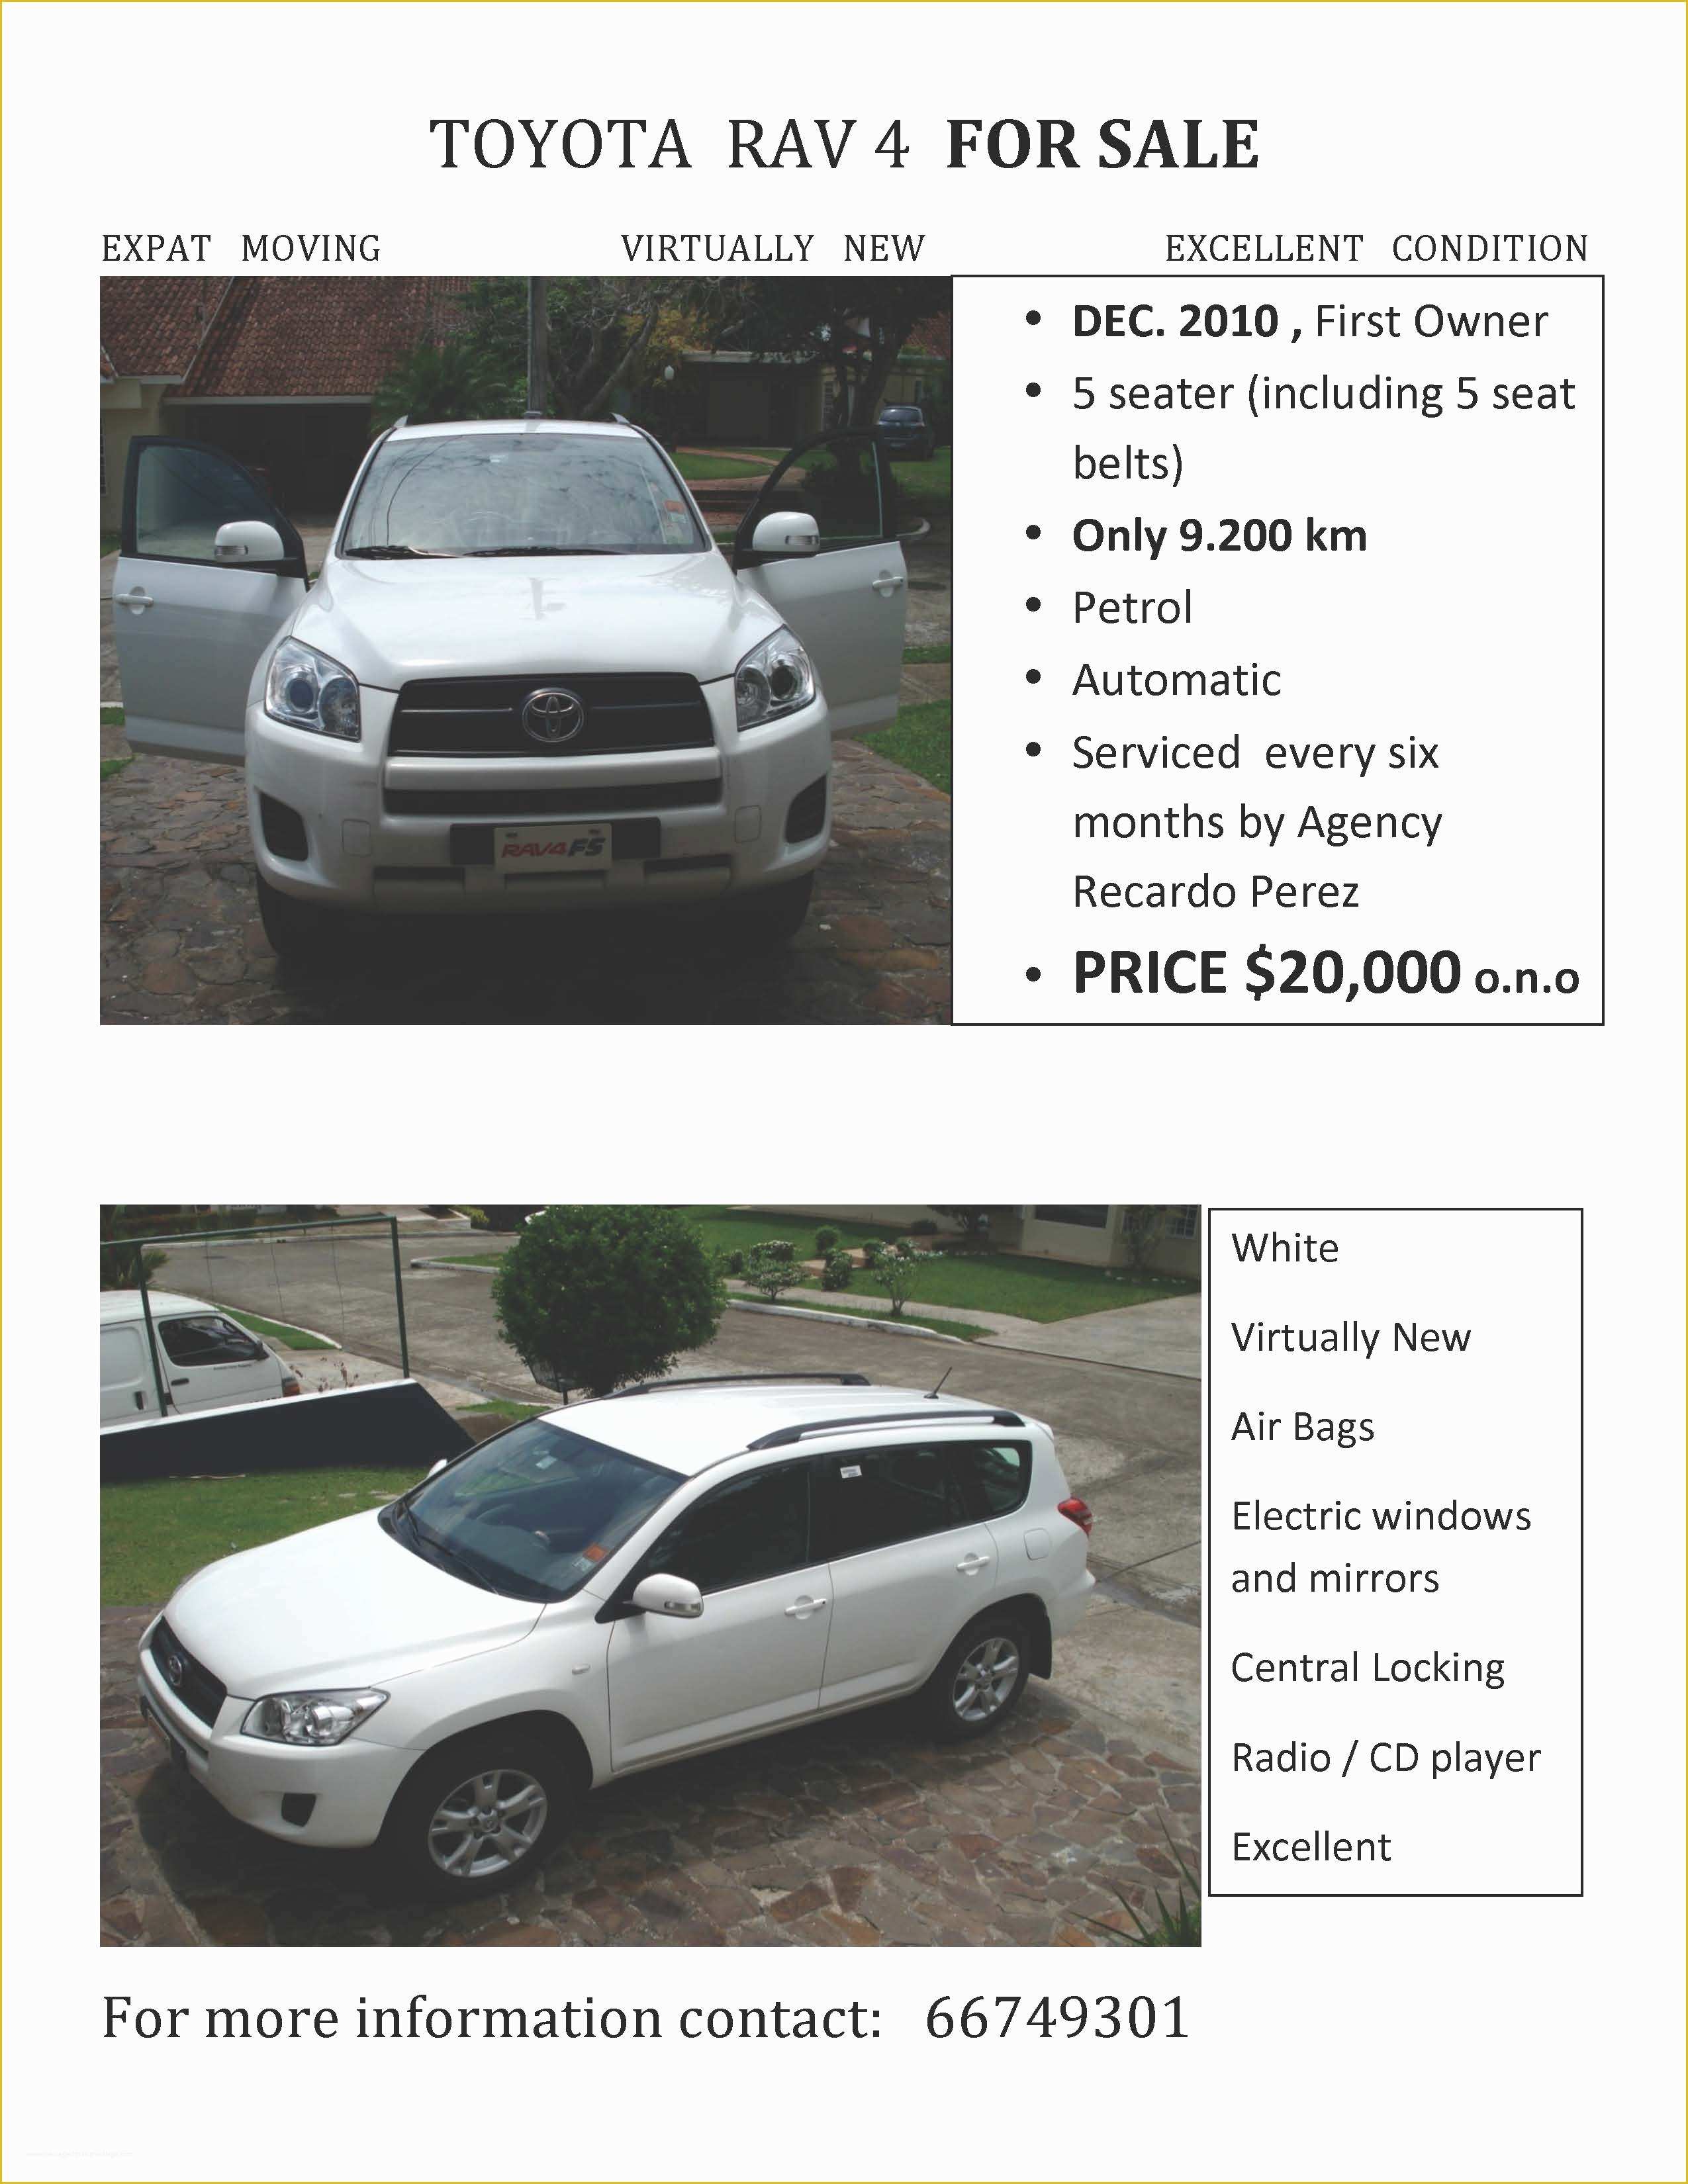 Car for Sale Flyer Template Free Of Car for Sale